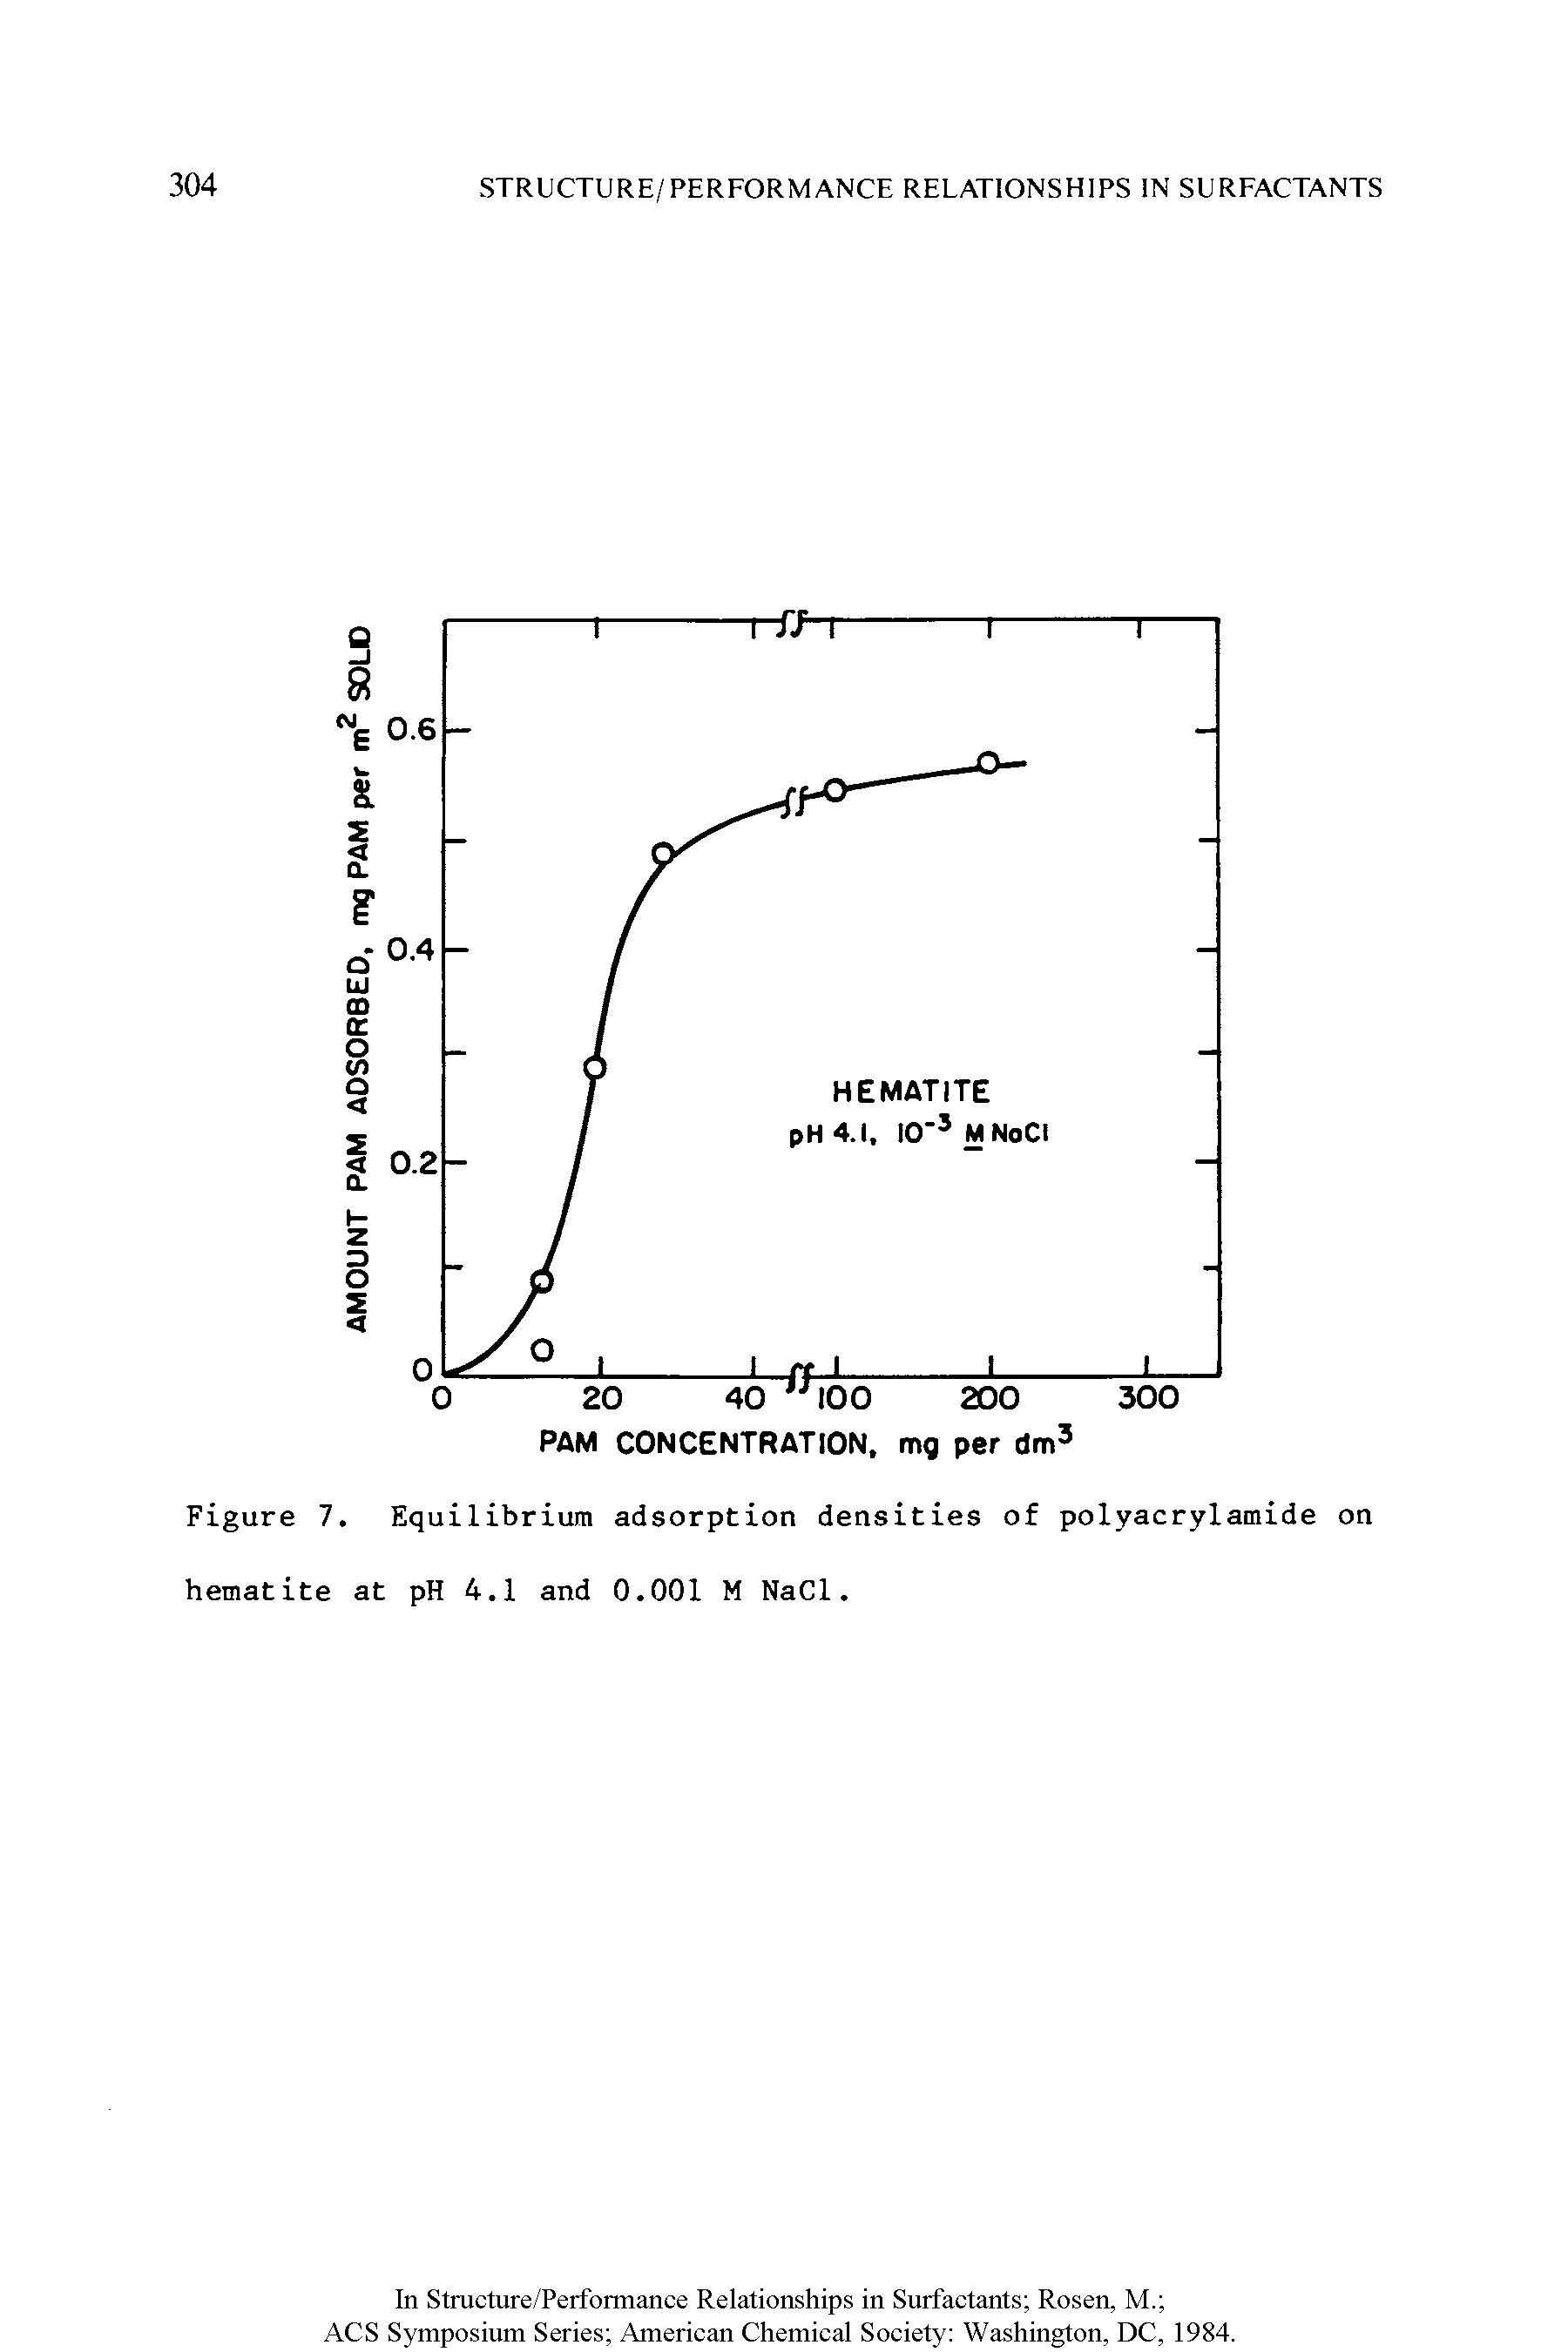 Figure 7. Equilibrium adsorption densities of polyacrylamide on hematite at pH 4.1 and 0.001 M NaCl.